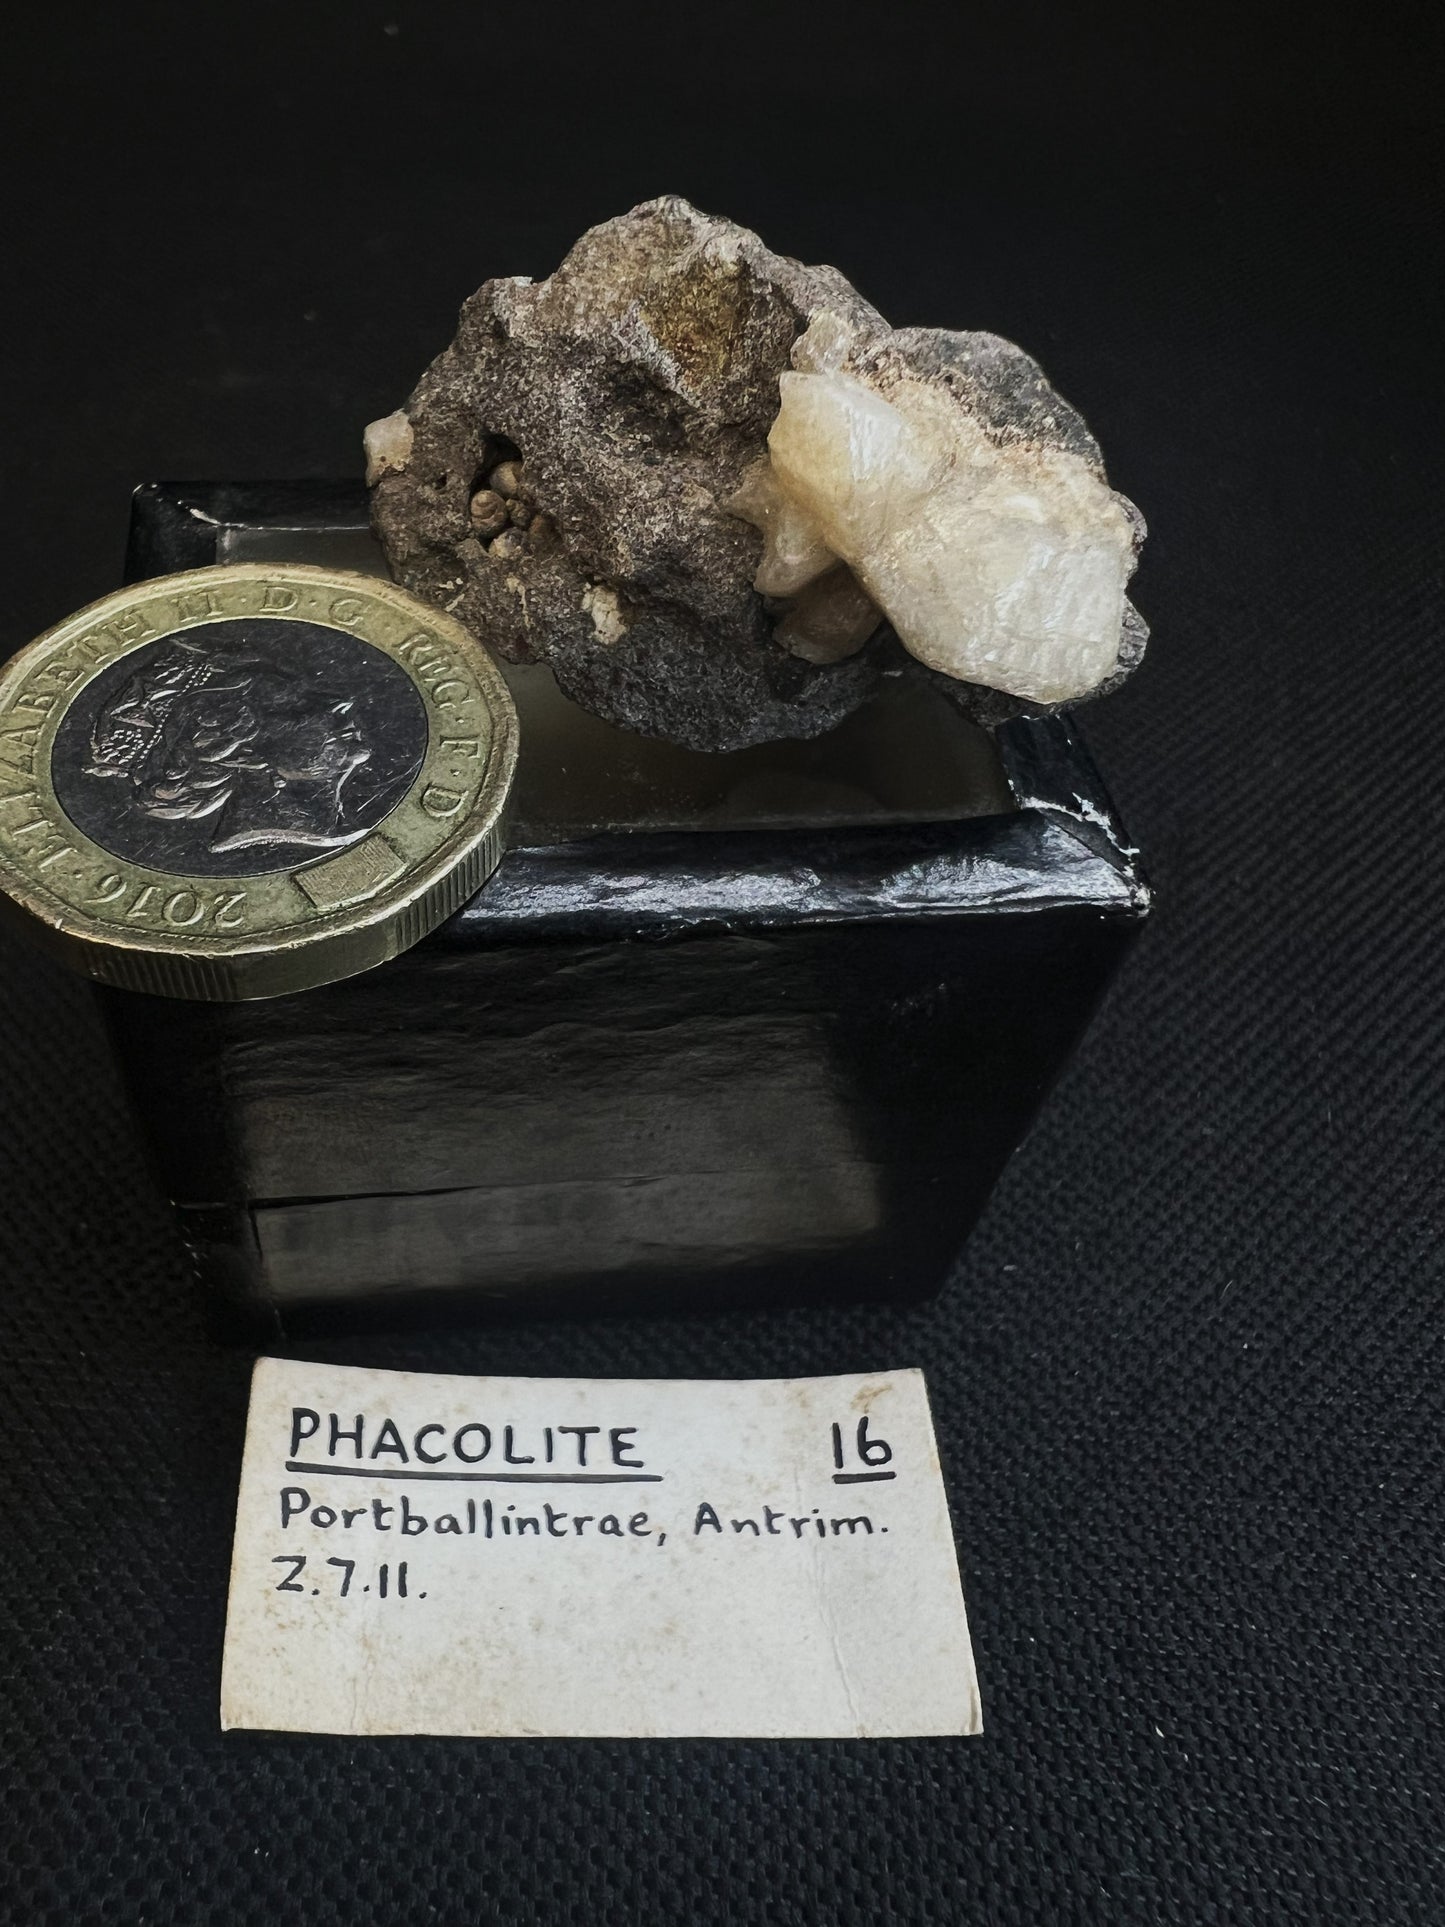 Phacolite Mineral From Portballintrae, Antrim, Northern Ireland- Collectors Piece